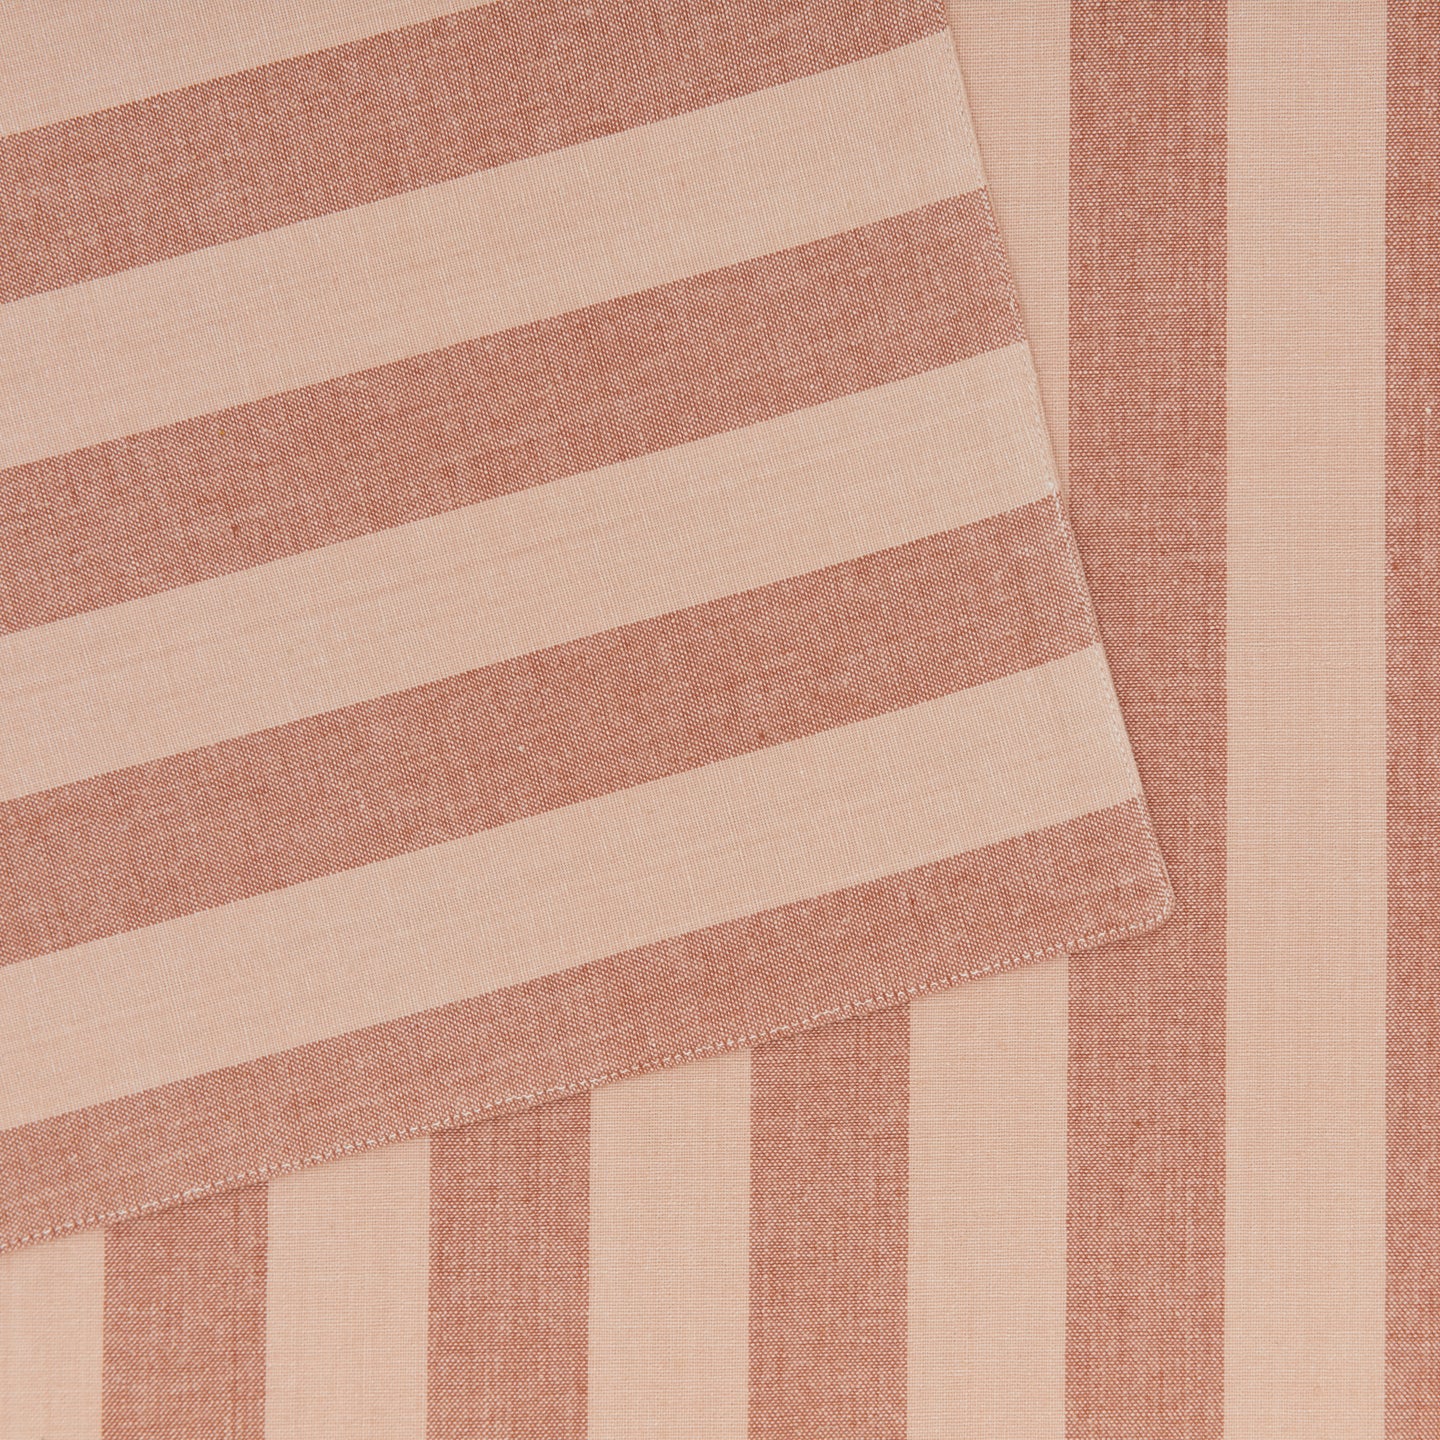 Essential Striped Placemat, Set of 4 - Blush/Terracotta